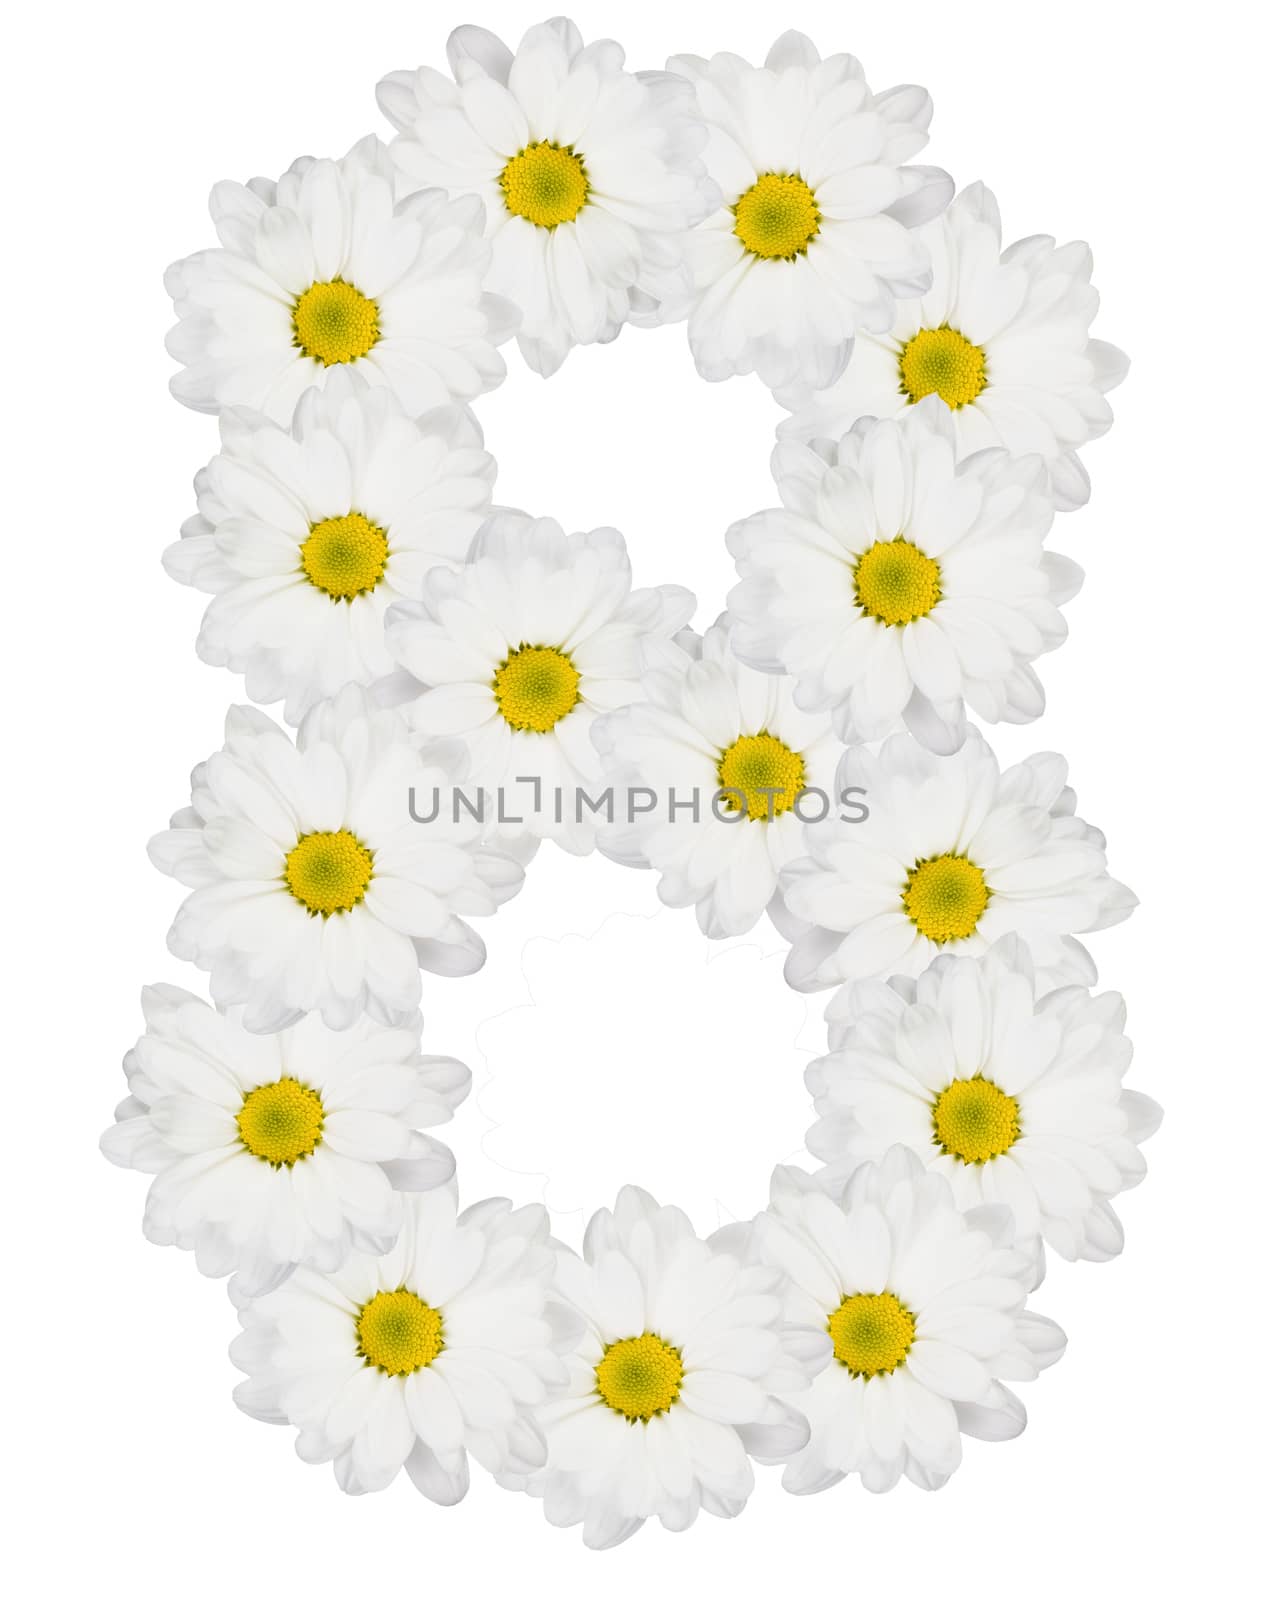 Number 8 made from flower isolated on white background